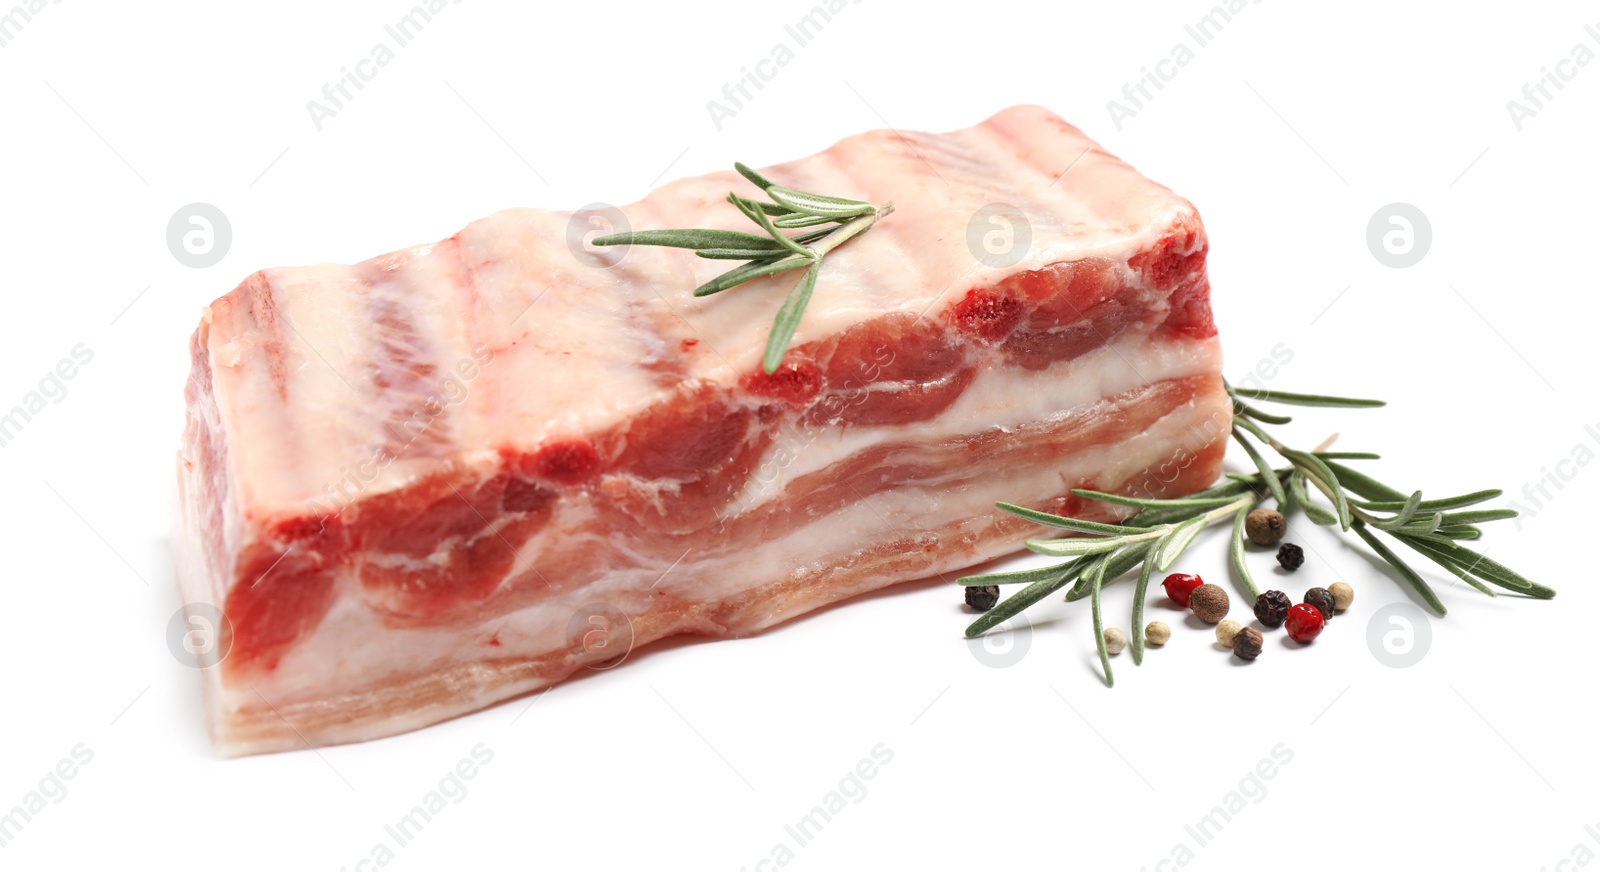 Photo of Raw ribs with rosemary and pepper on white background